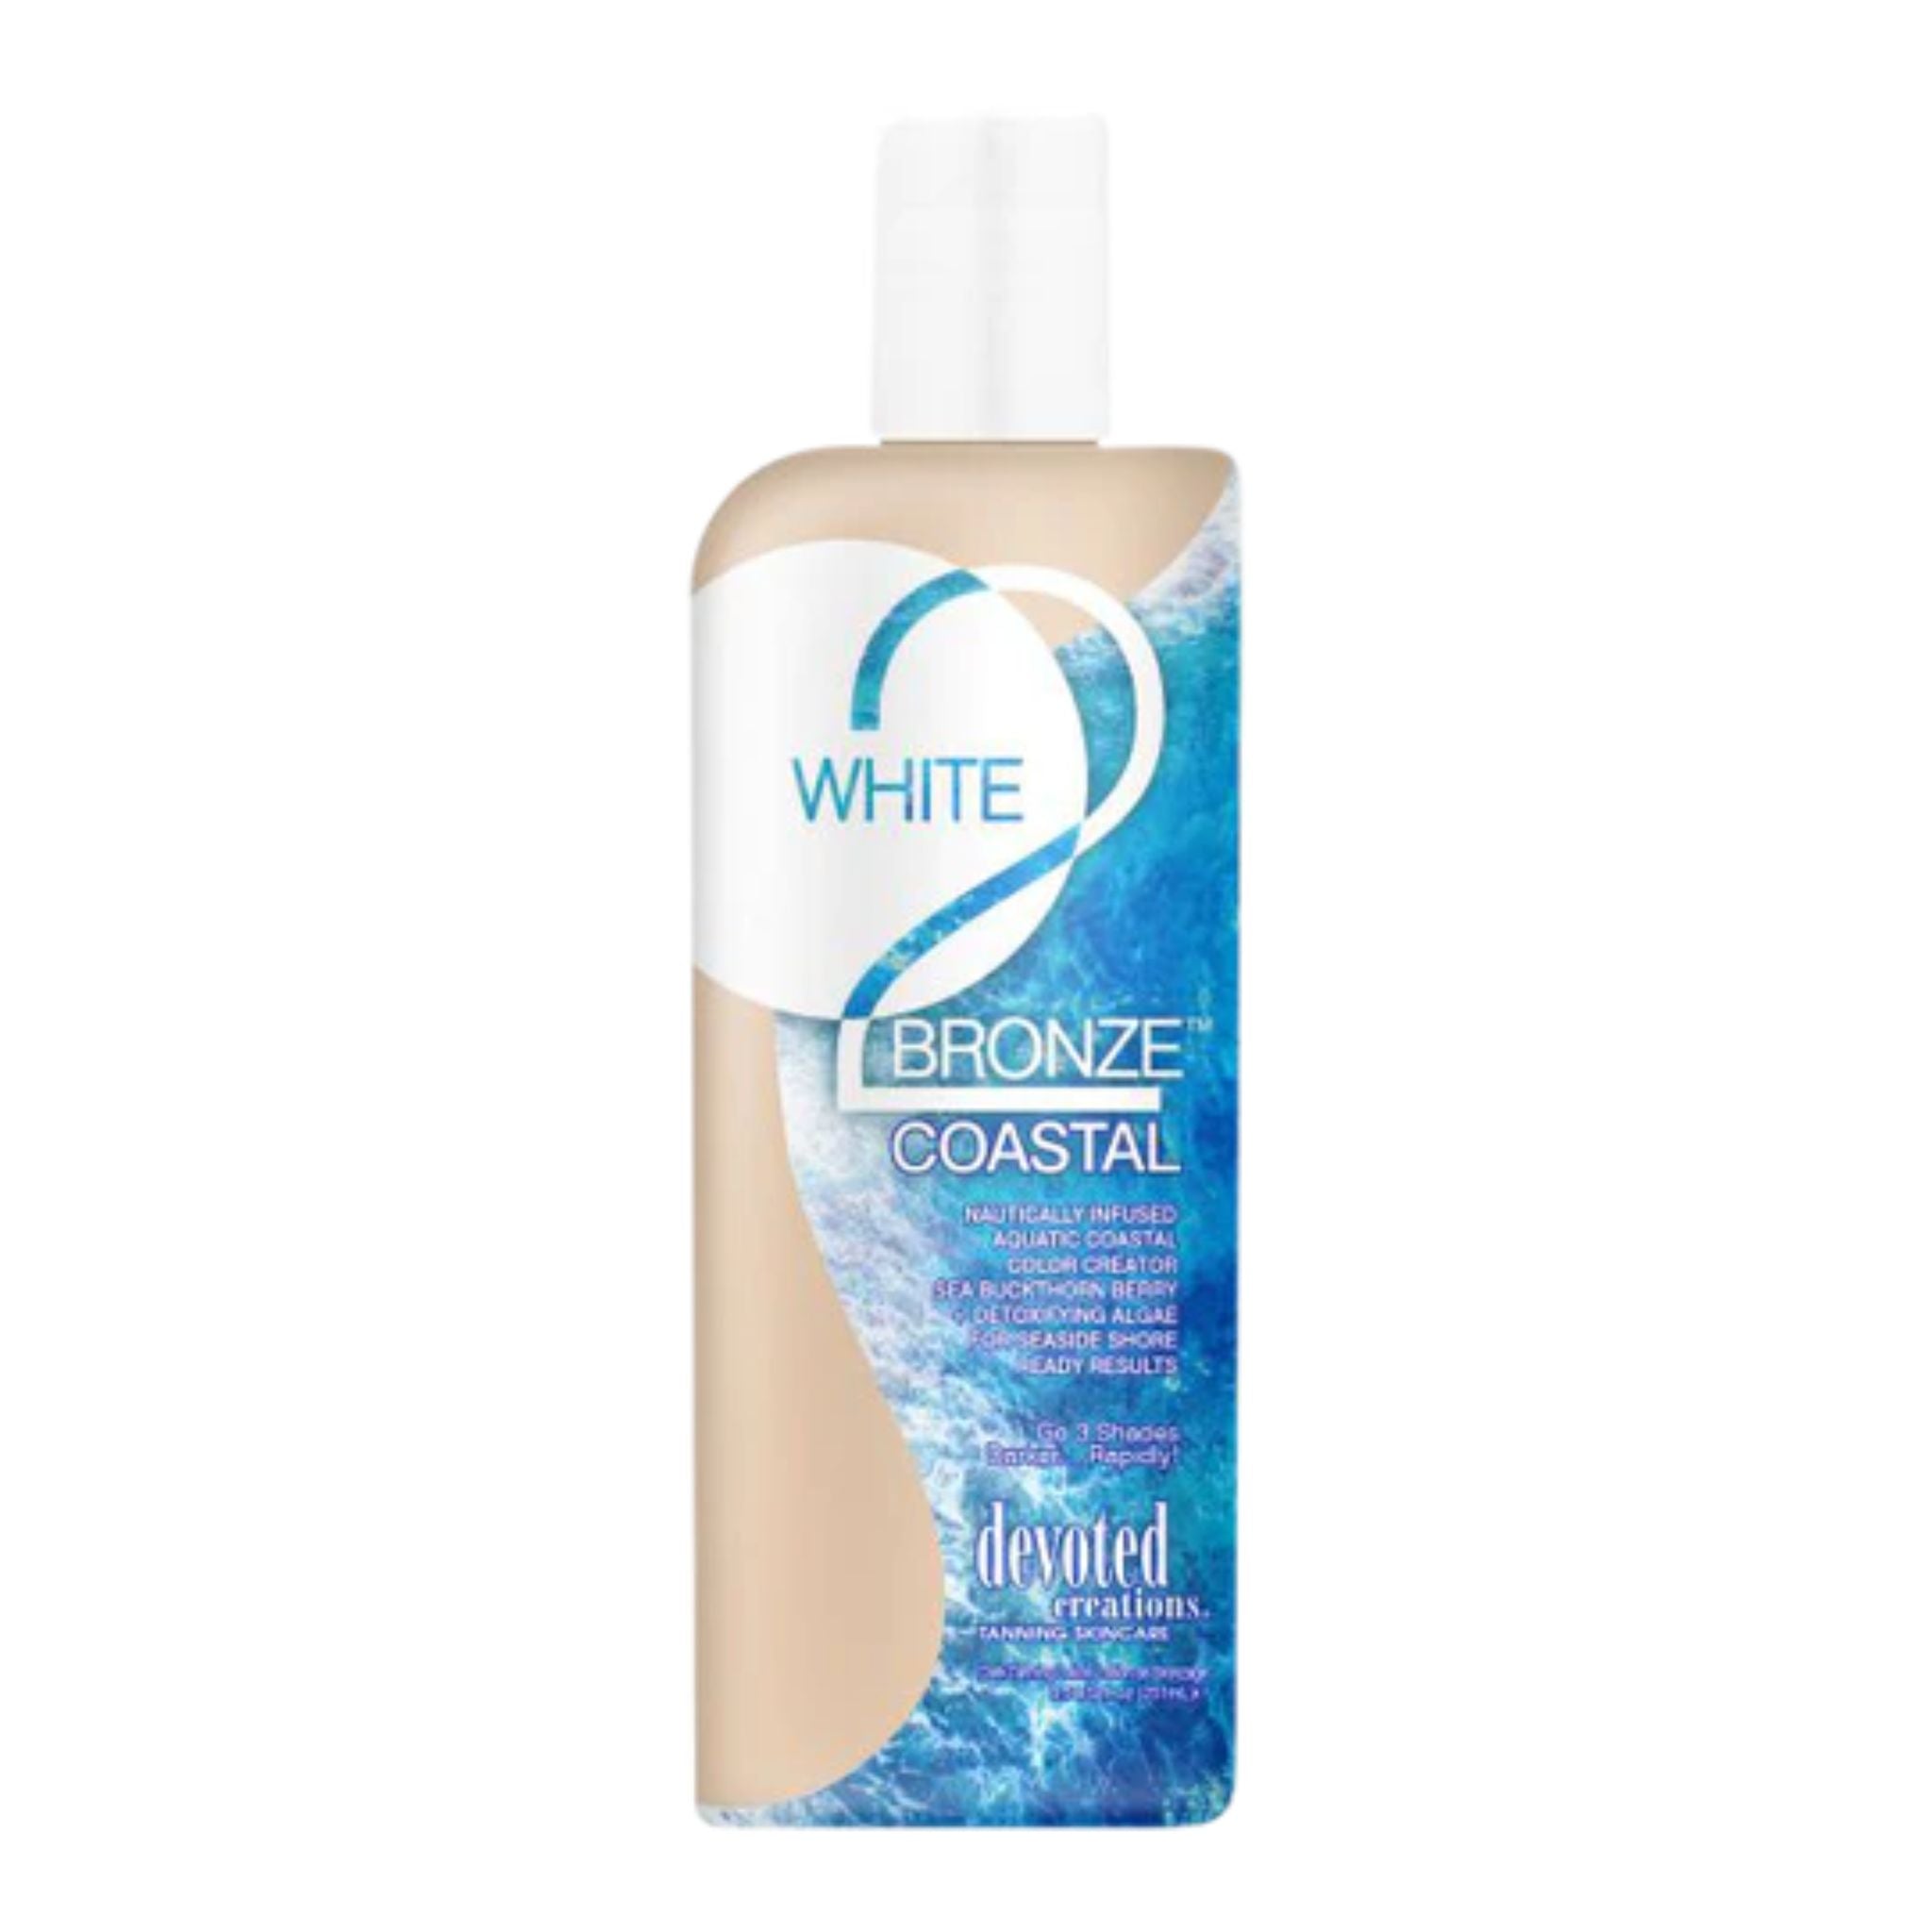 Devoted Creations White 2 Bronze Coastal Tanning Lotion Tanning Lotion